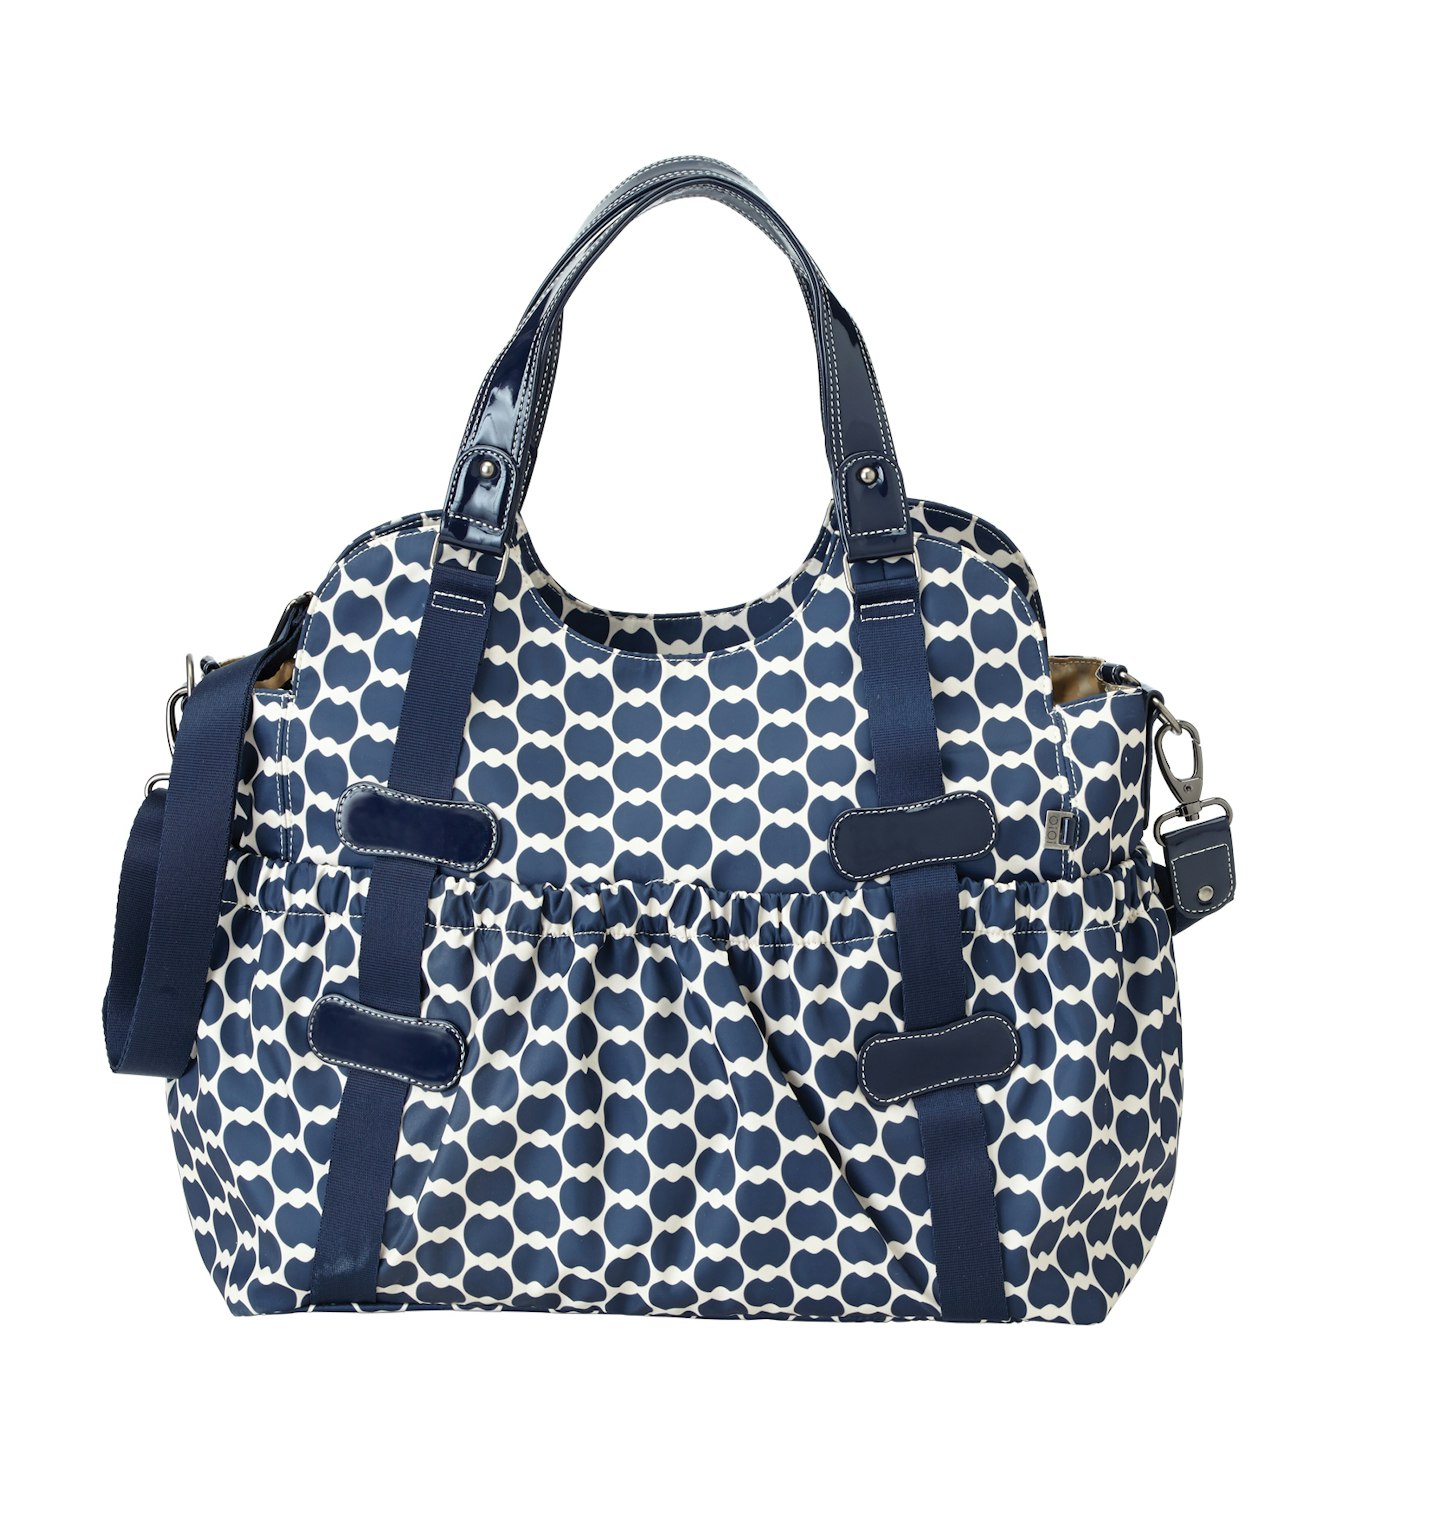 OiOi Eclipse Dot Tote Baby Changing Bag